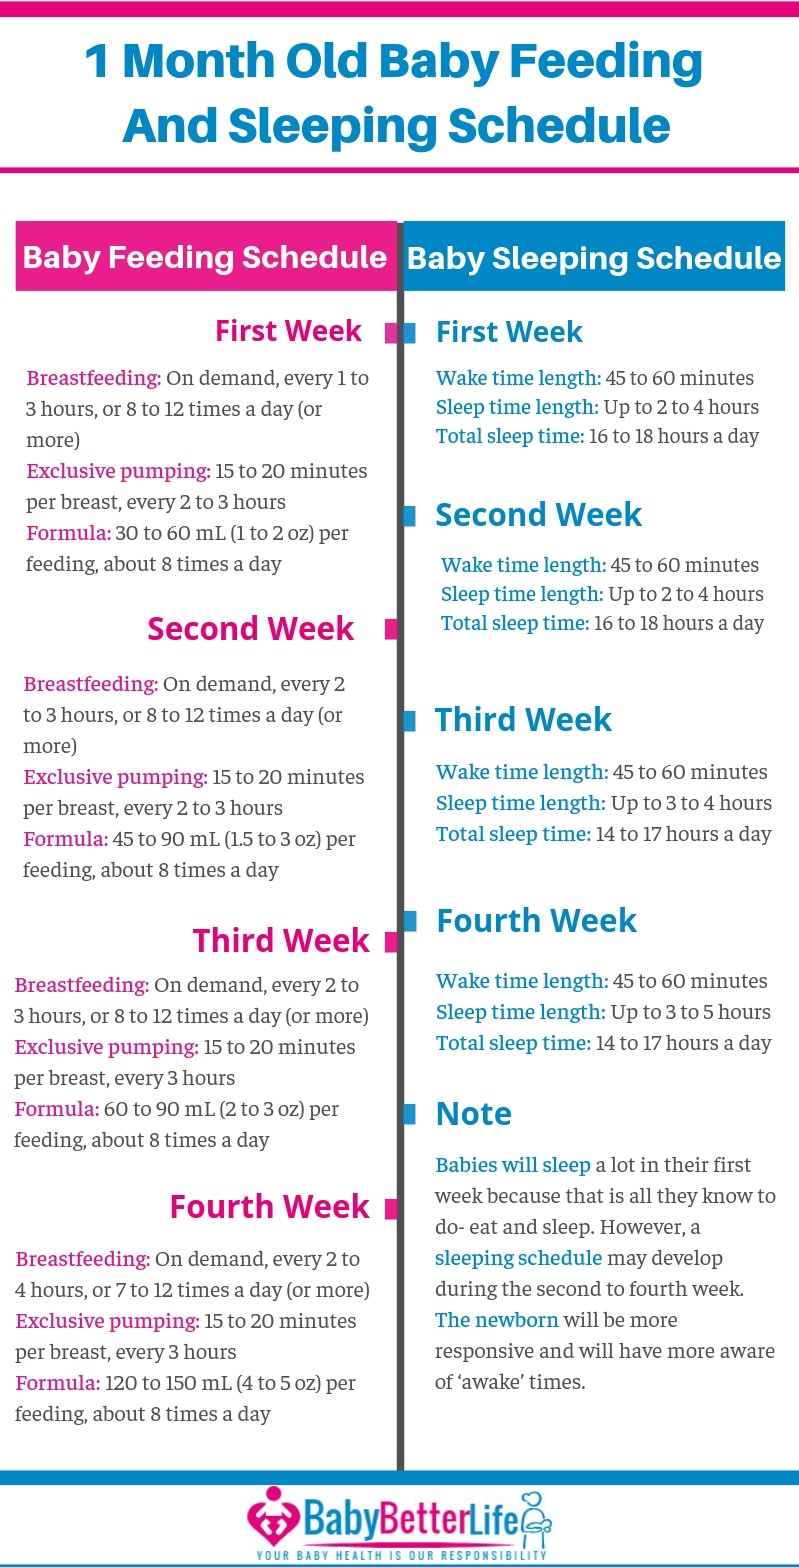 1 month old baby schedule